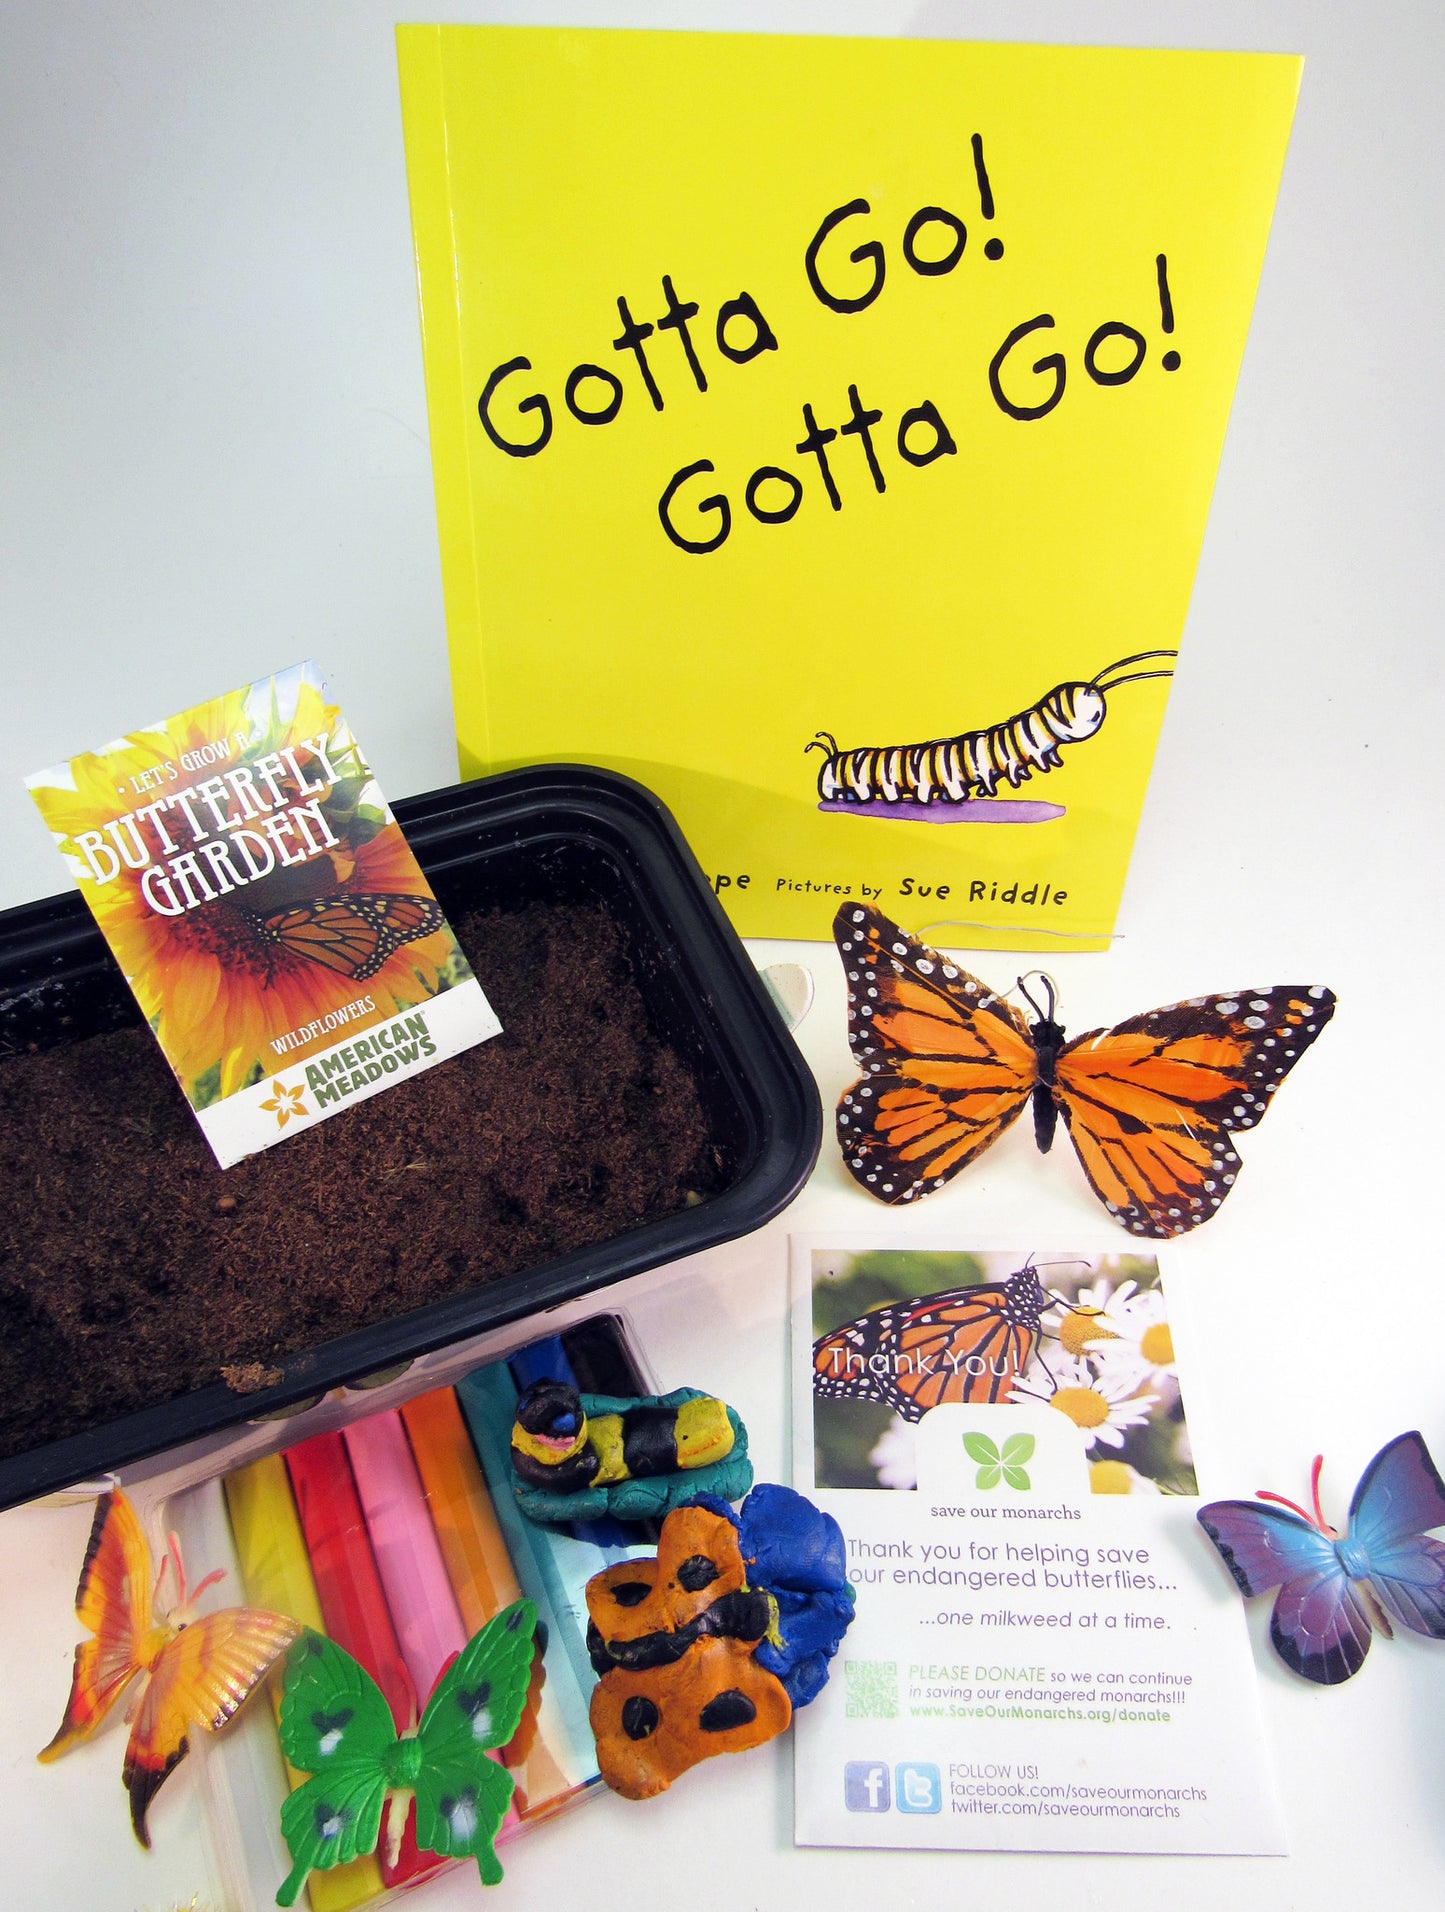 Ivy Kids Educational Activity Kit featuring the book Gotta Go! Gotta Go! by Sam Swope and over 10 art, literacy, math, and science activities inspired by the story. Learn about monarch butterflies. Perfect kit for spring.